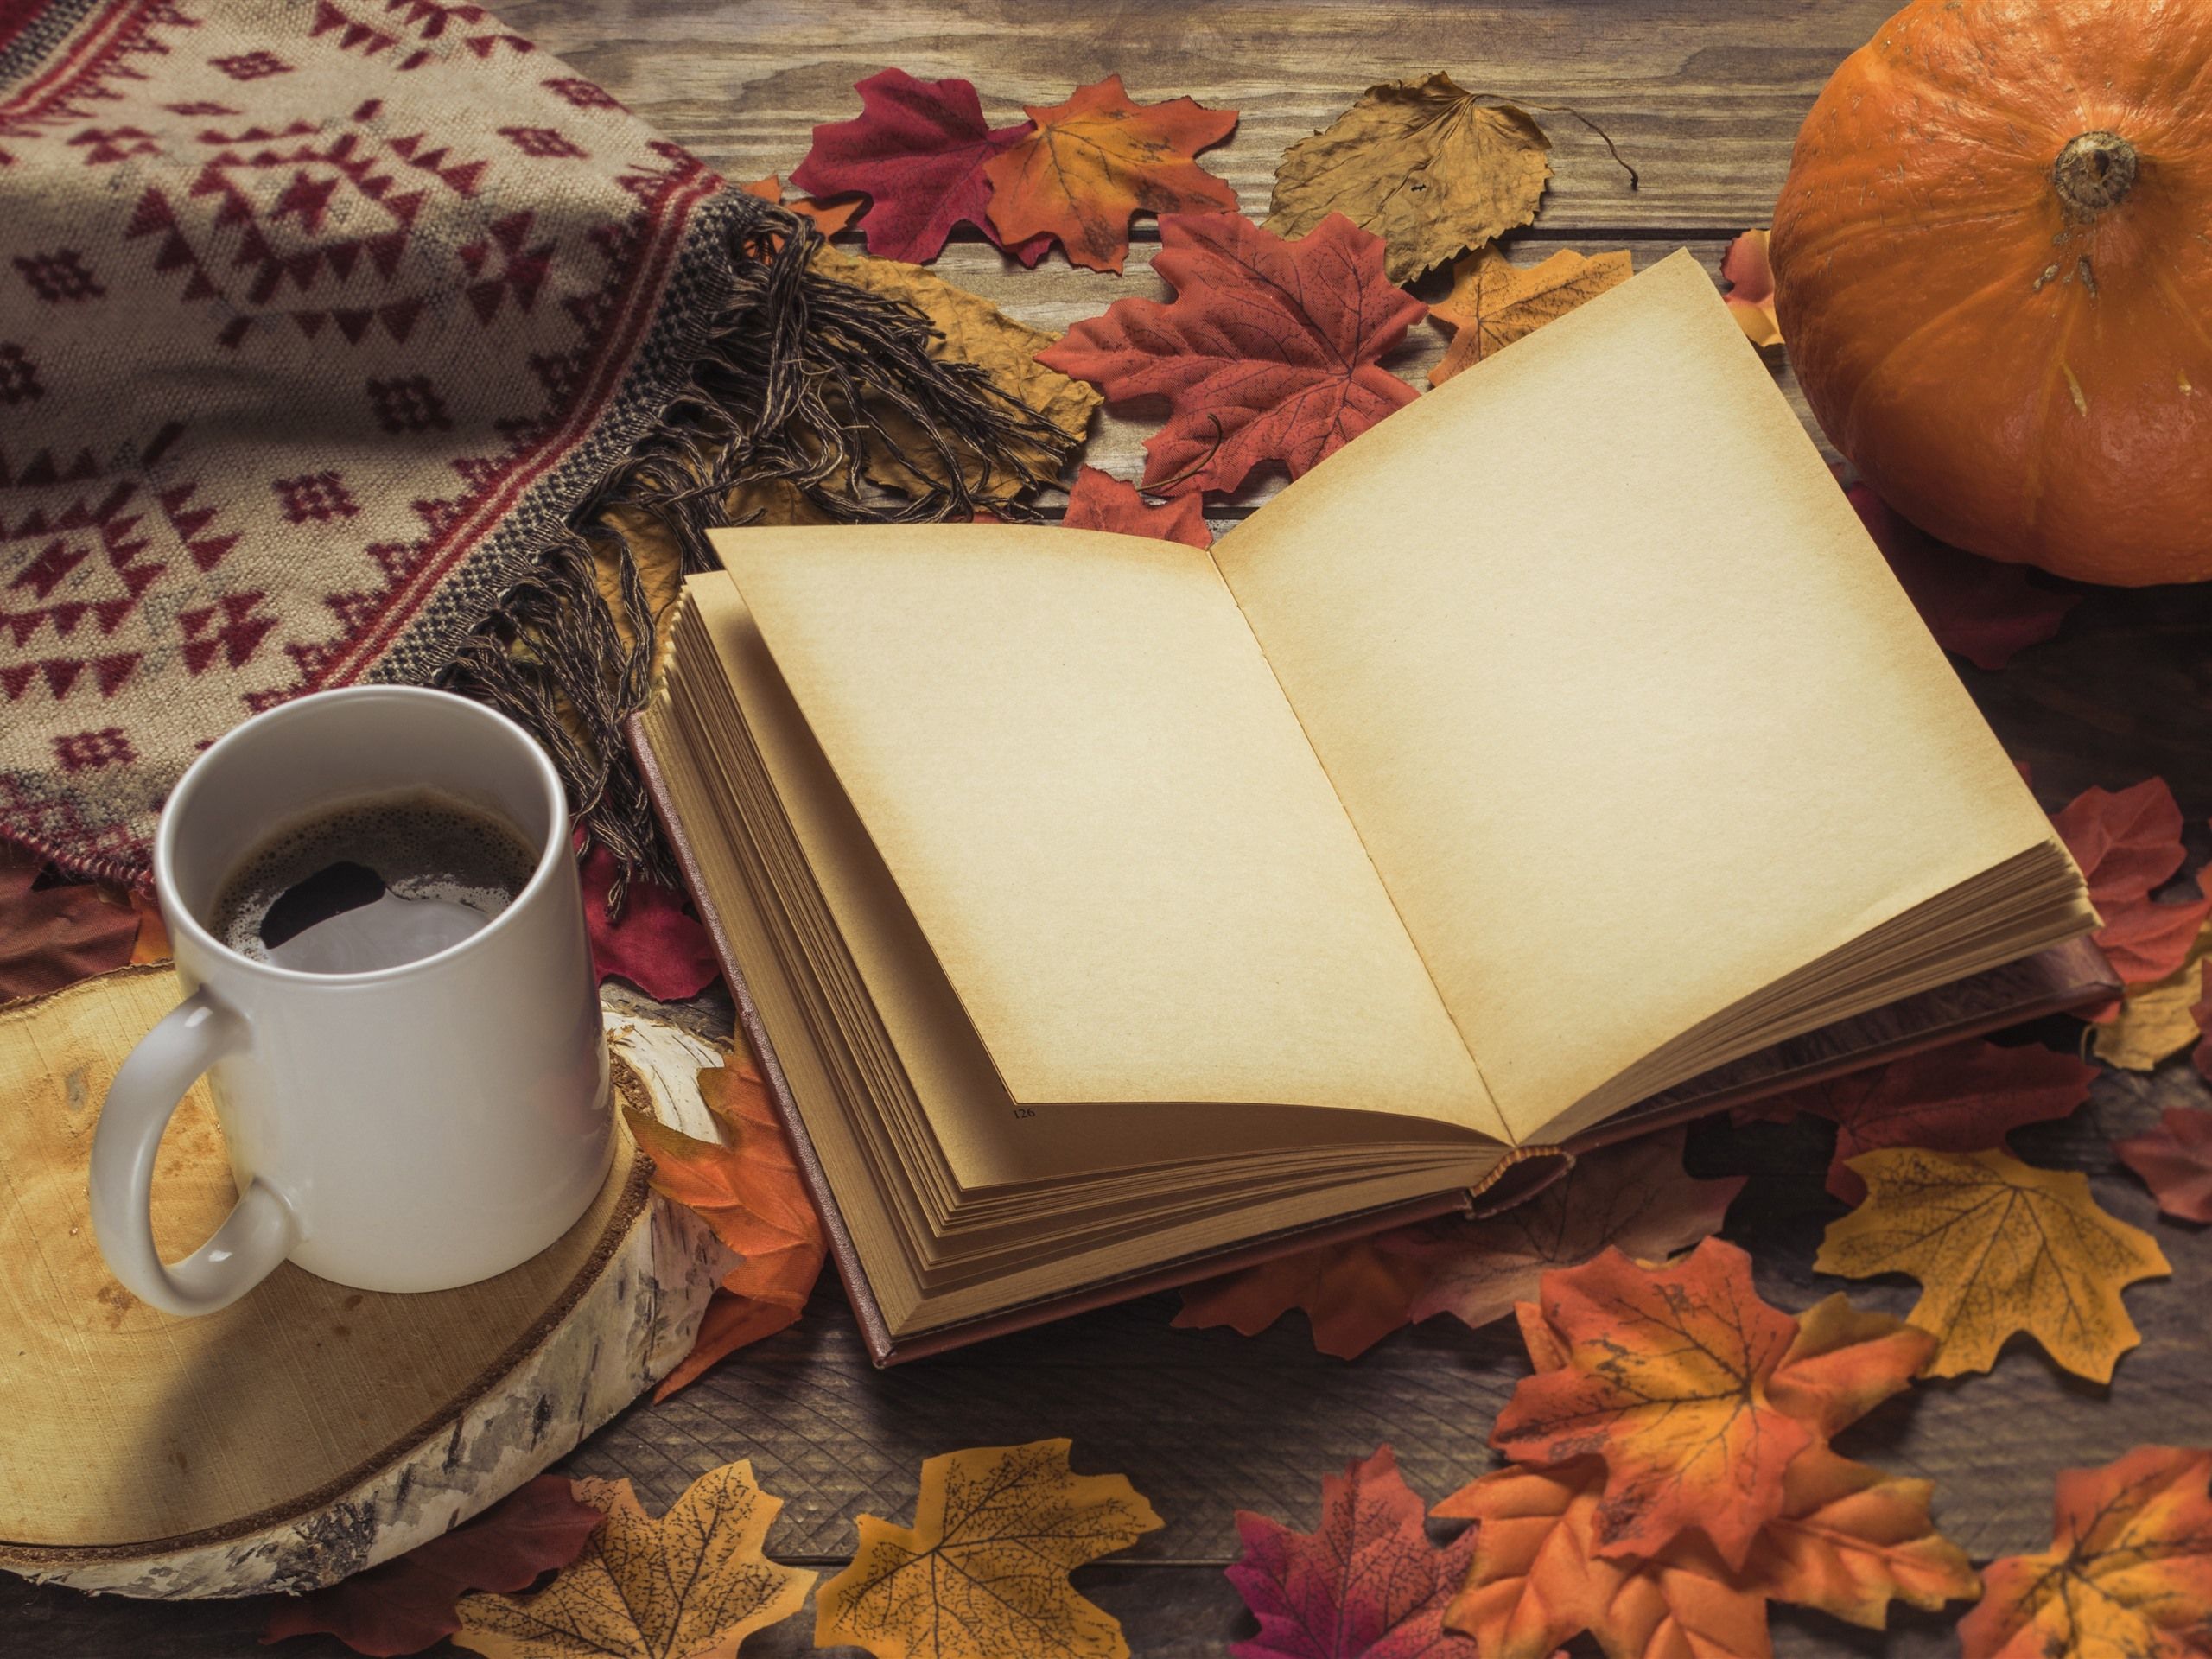 Wallpaper Book, coffee, maple leaves, still life 5120x2880 UHD 5K Picture, Image